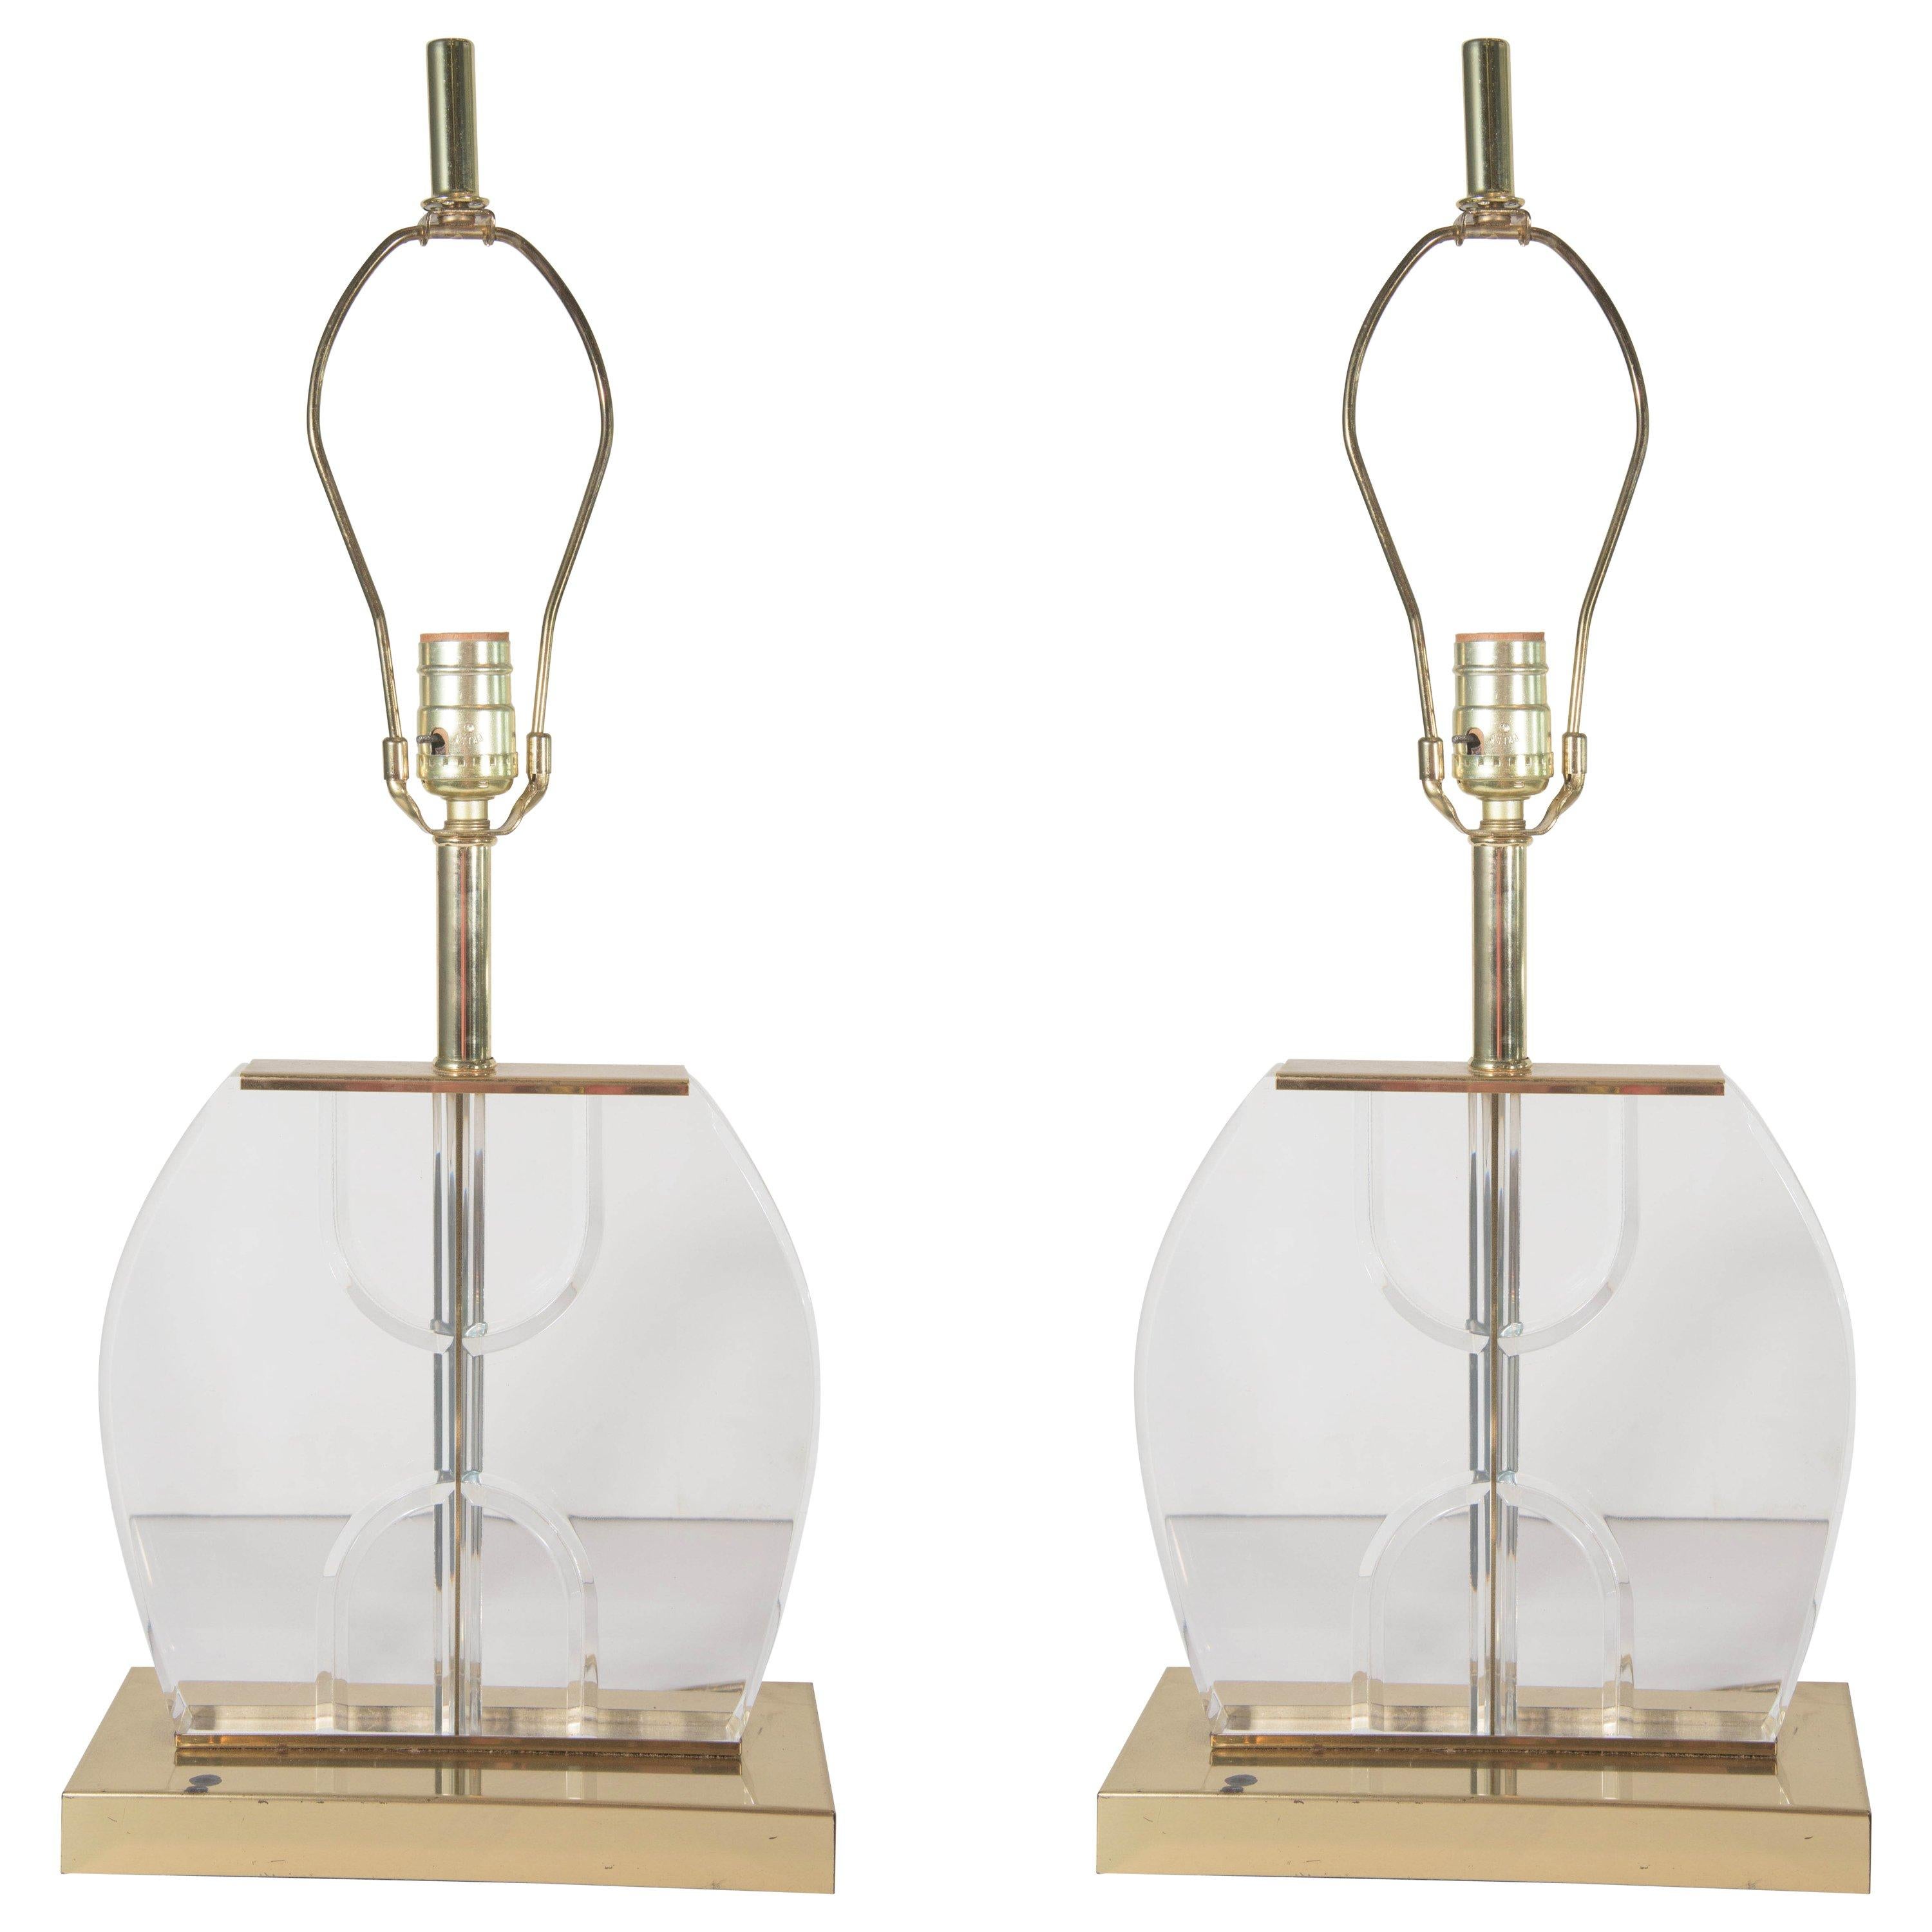 Pair of 1970's Table Lamps in Lucite and Brass